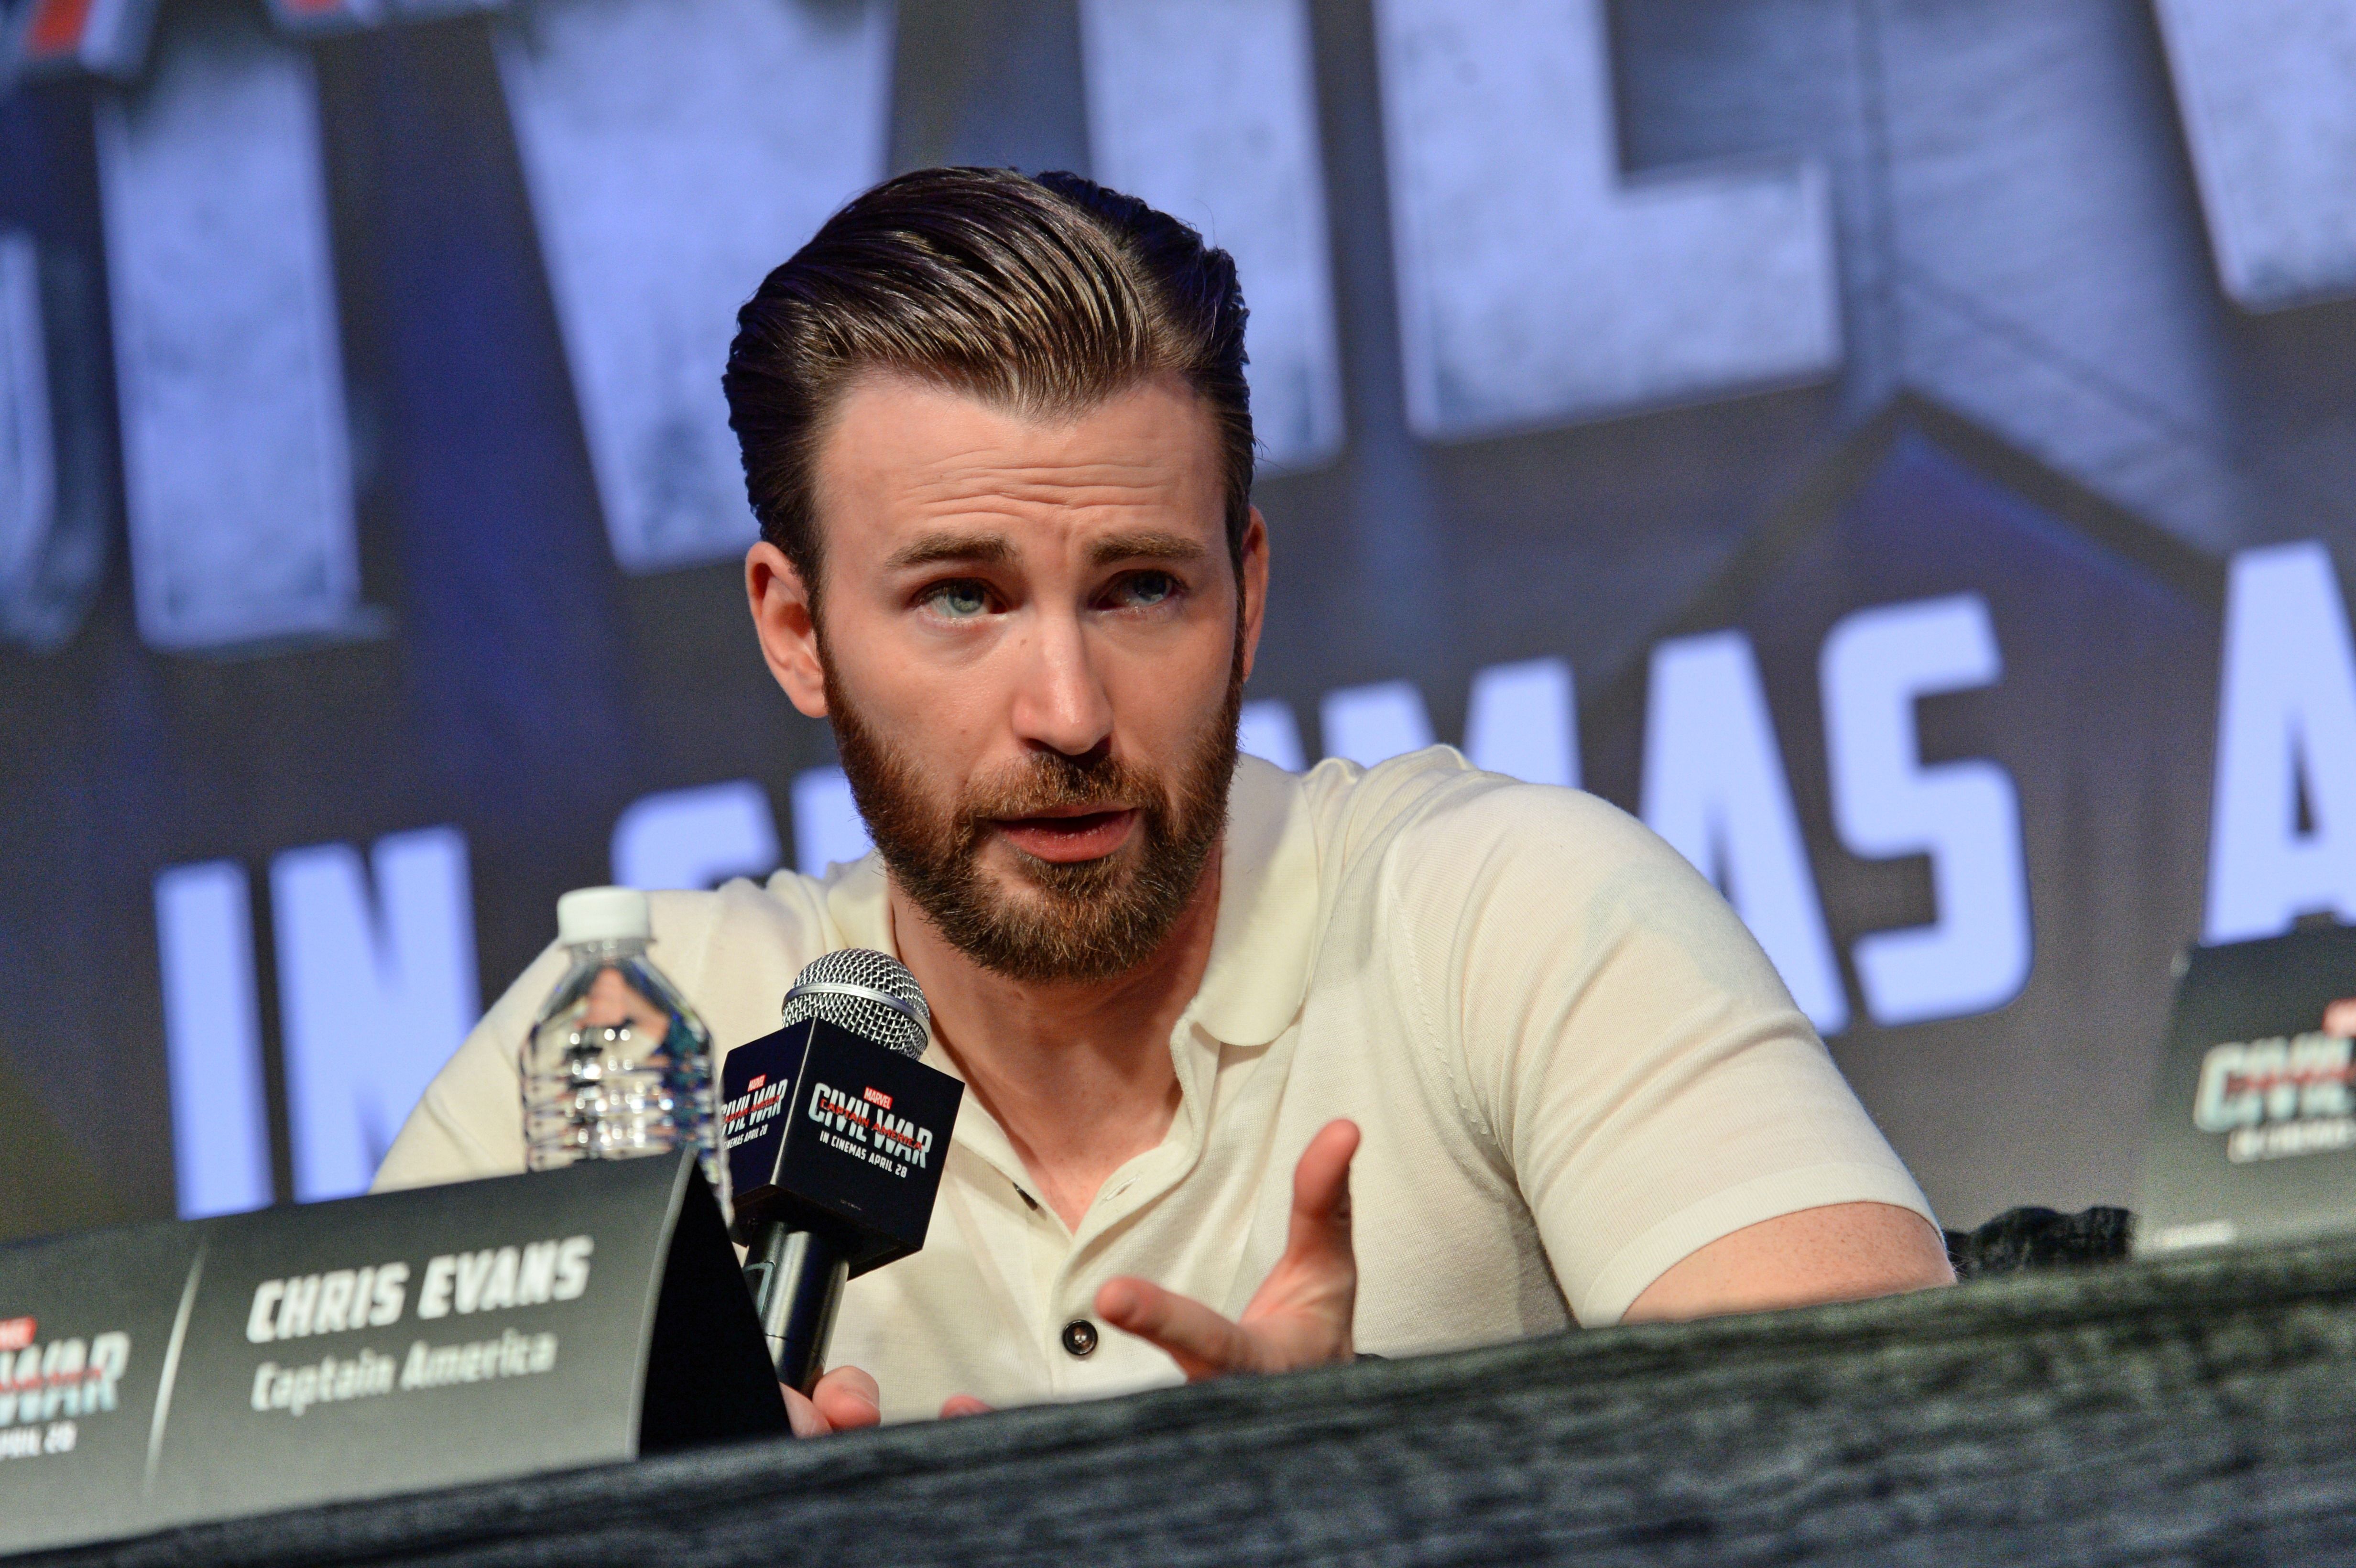 Actor Chris Evans attends a press conference at Marina Bay Sands